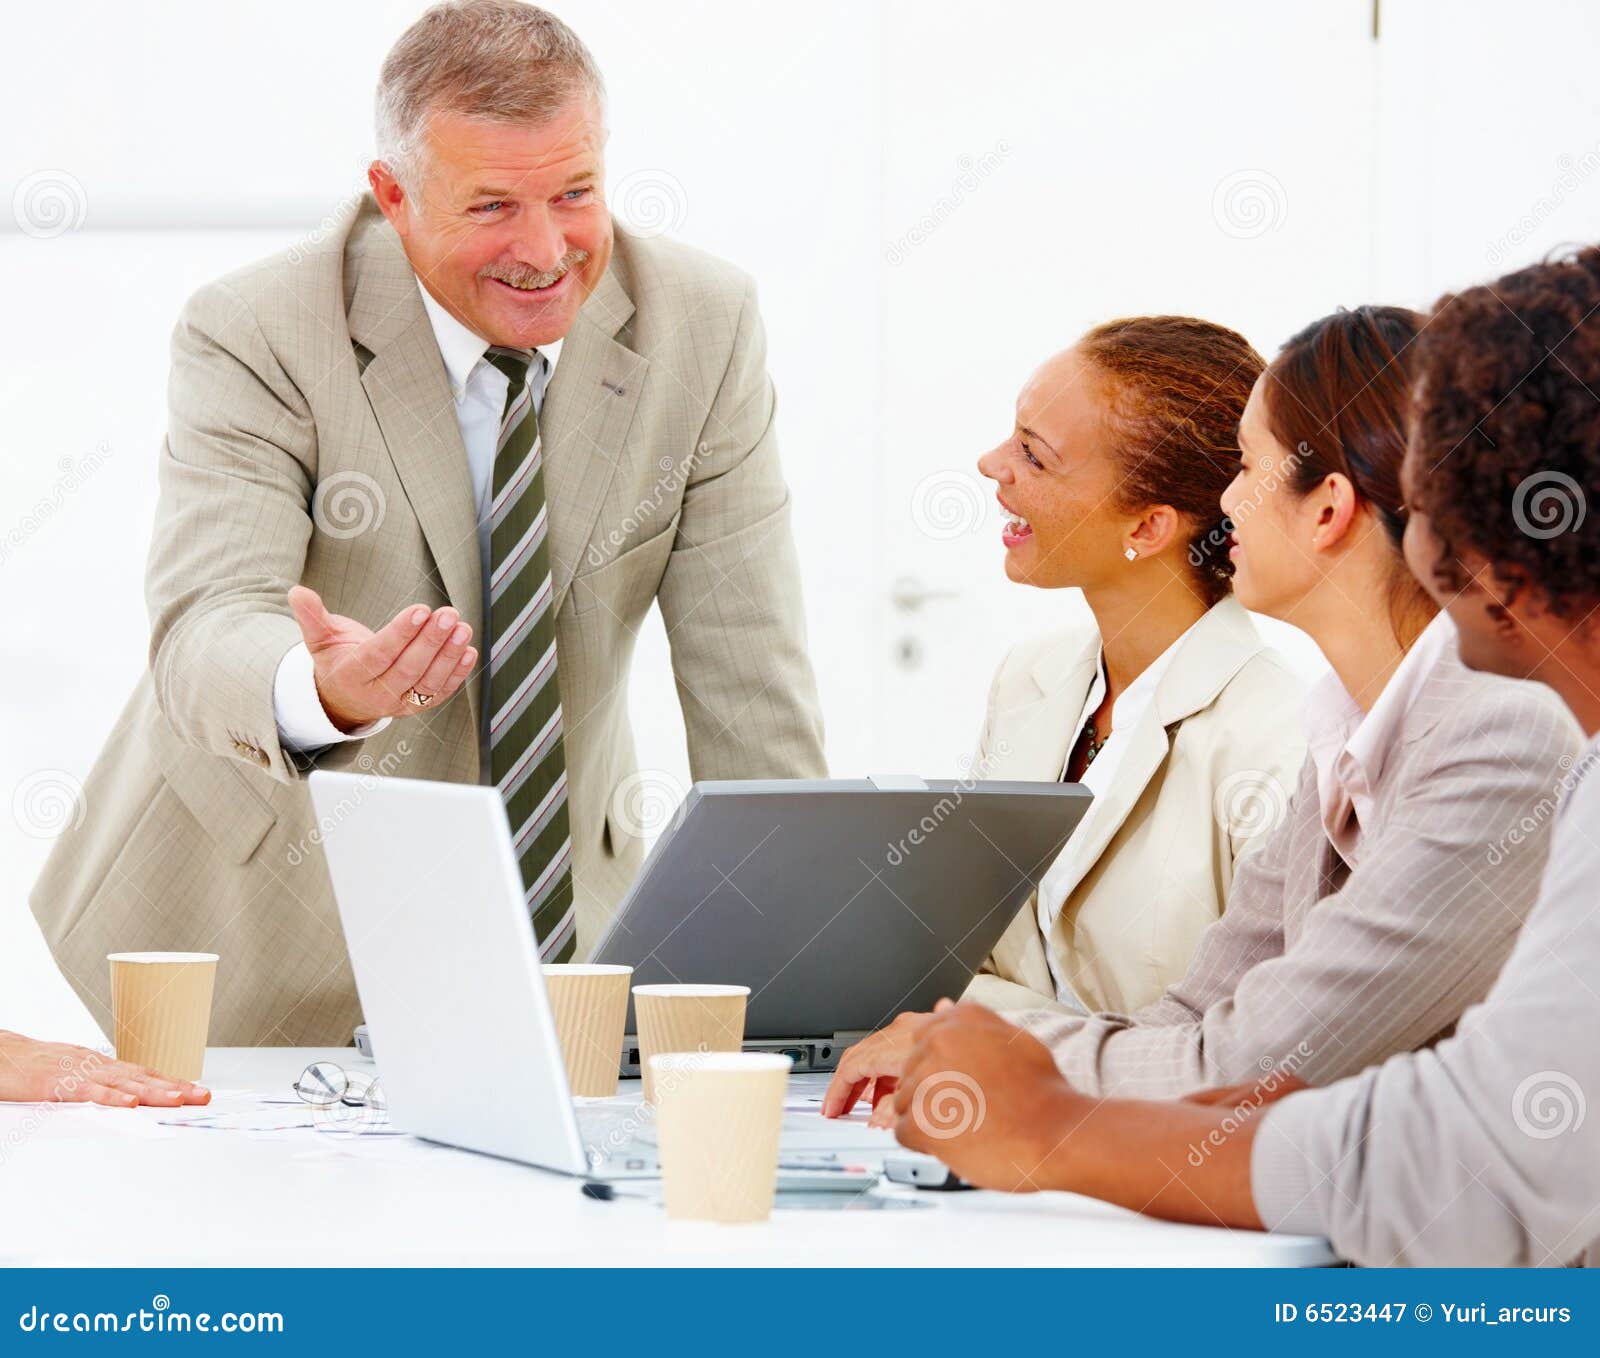 Mature Happy Speaker at a Business Meeting Stock Image - Image of happy ...